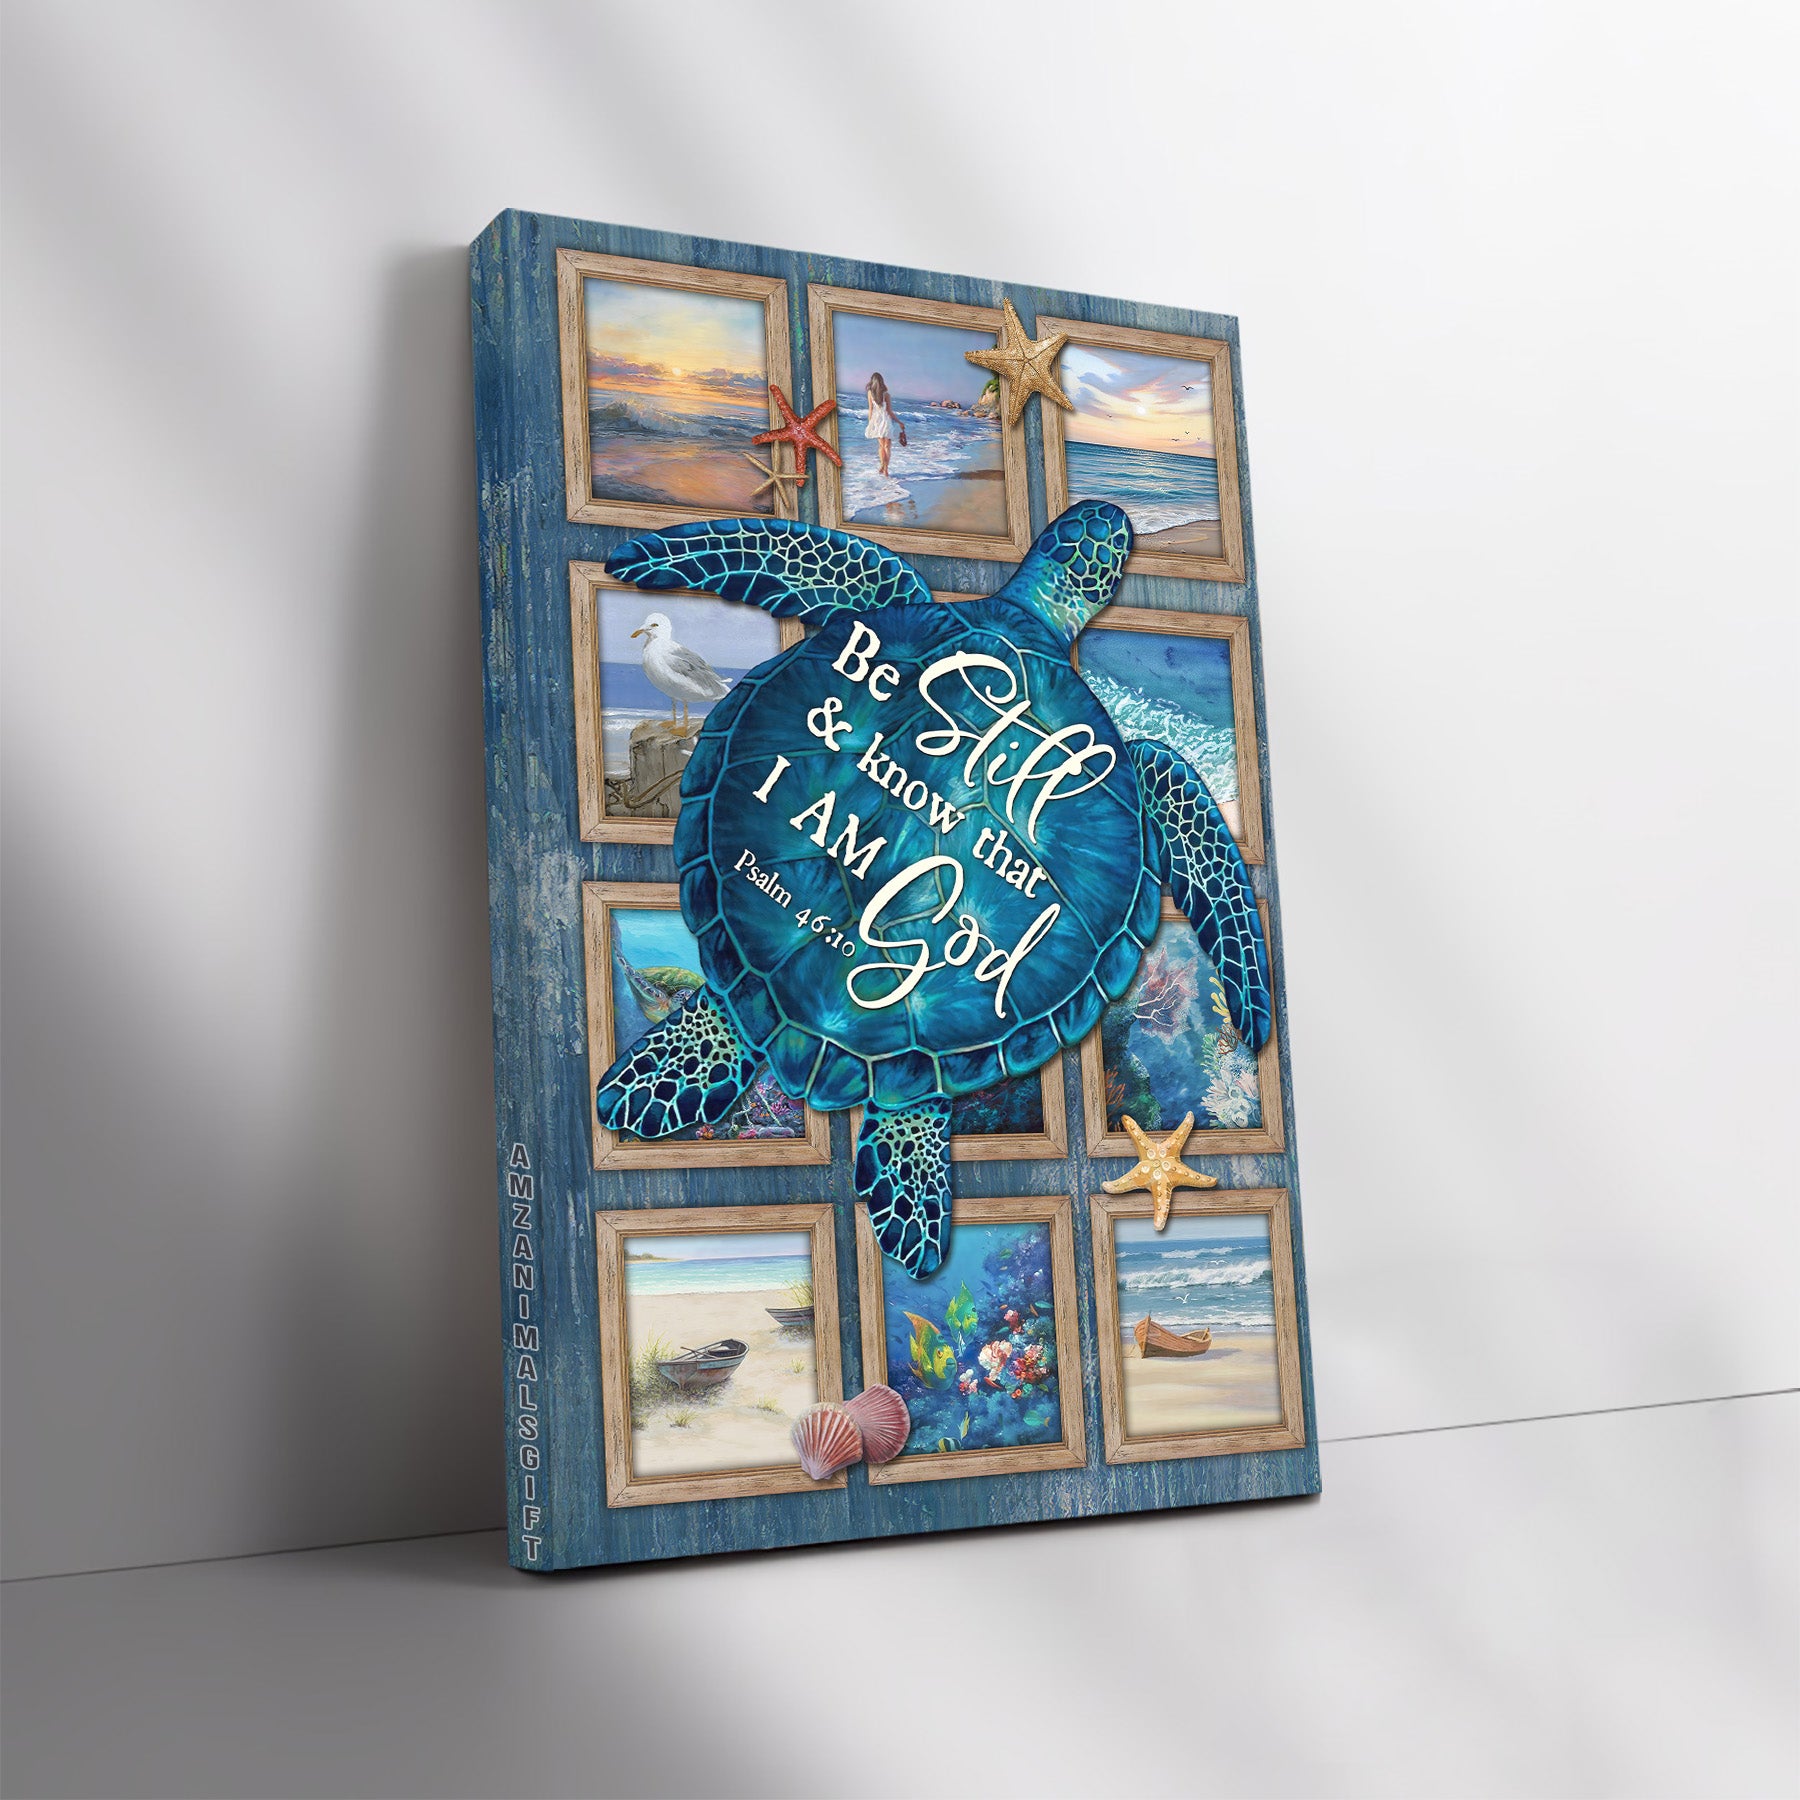 Jesus Portrait Premium Wrapped Canvas - Blue sea turtle, Ocean vibe, Colorful starfish, Be still and know that I am God - Gift for Christian, Family